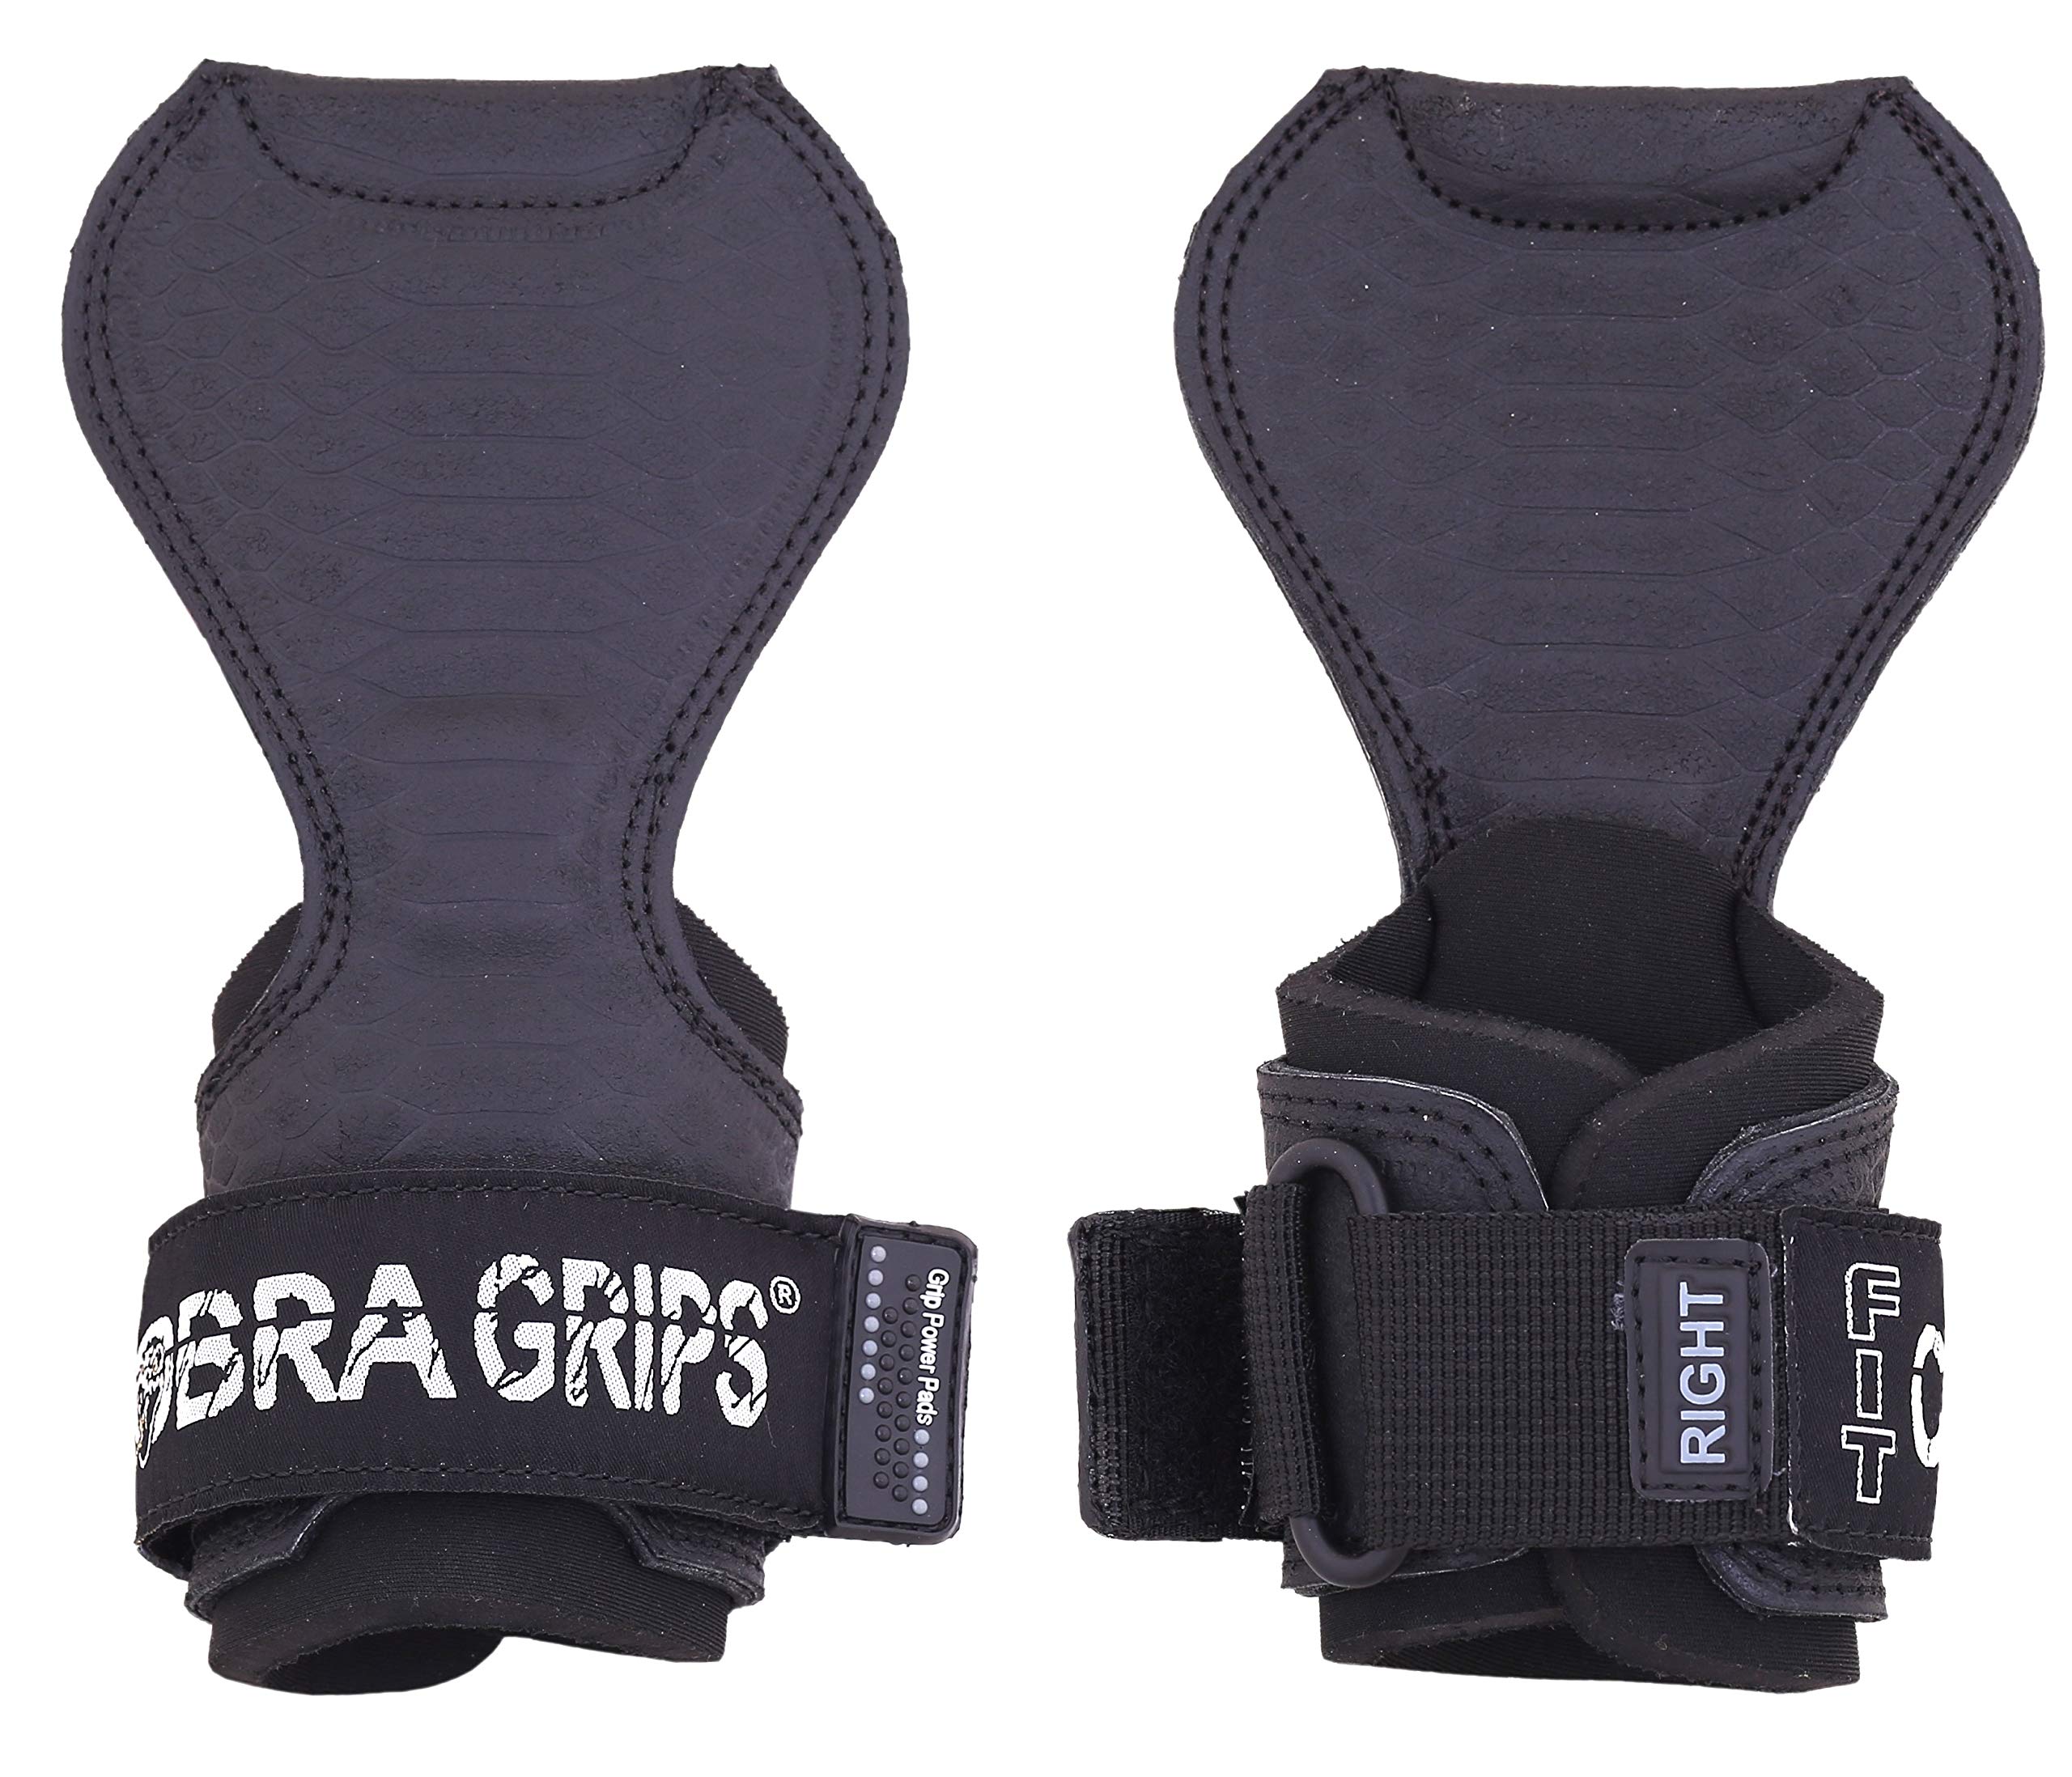 Cobra Grips PRO Weight Lifting Gloves Heavy Duty Straps